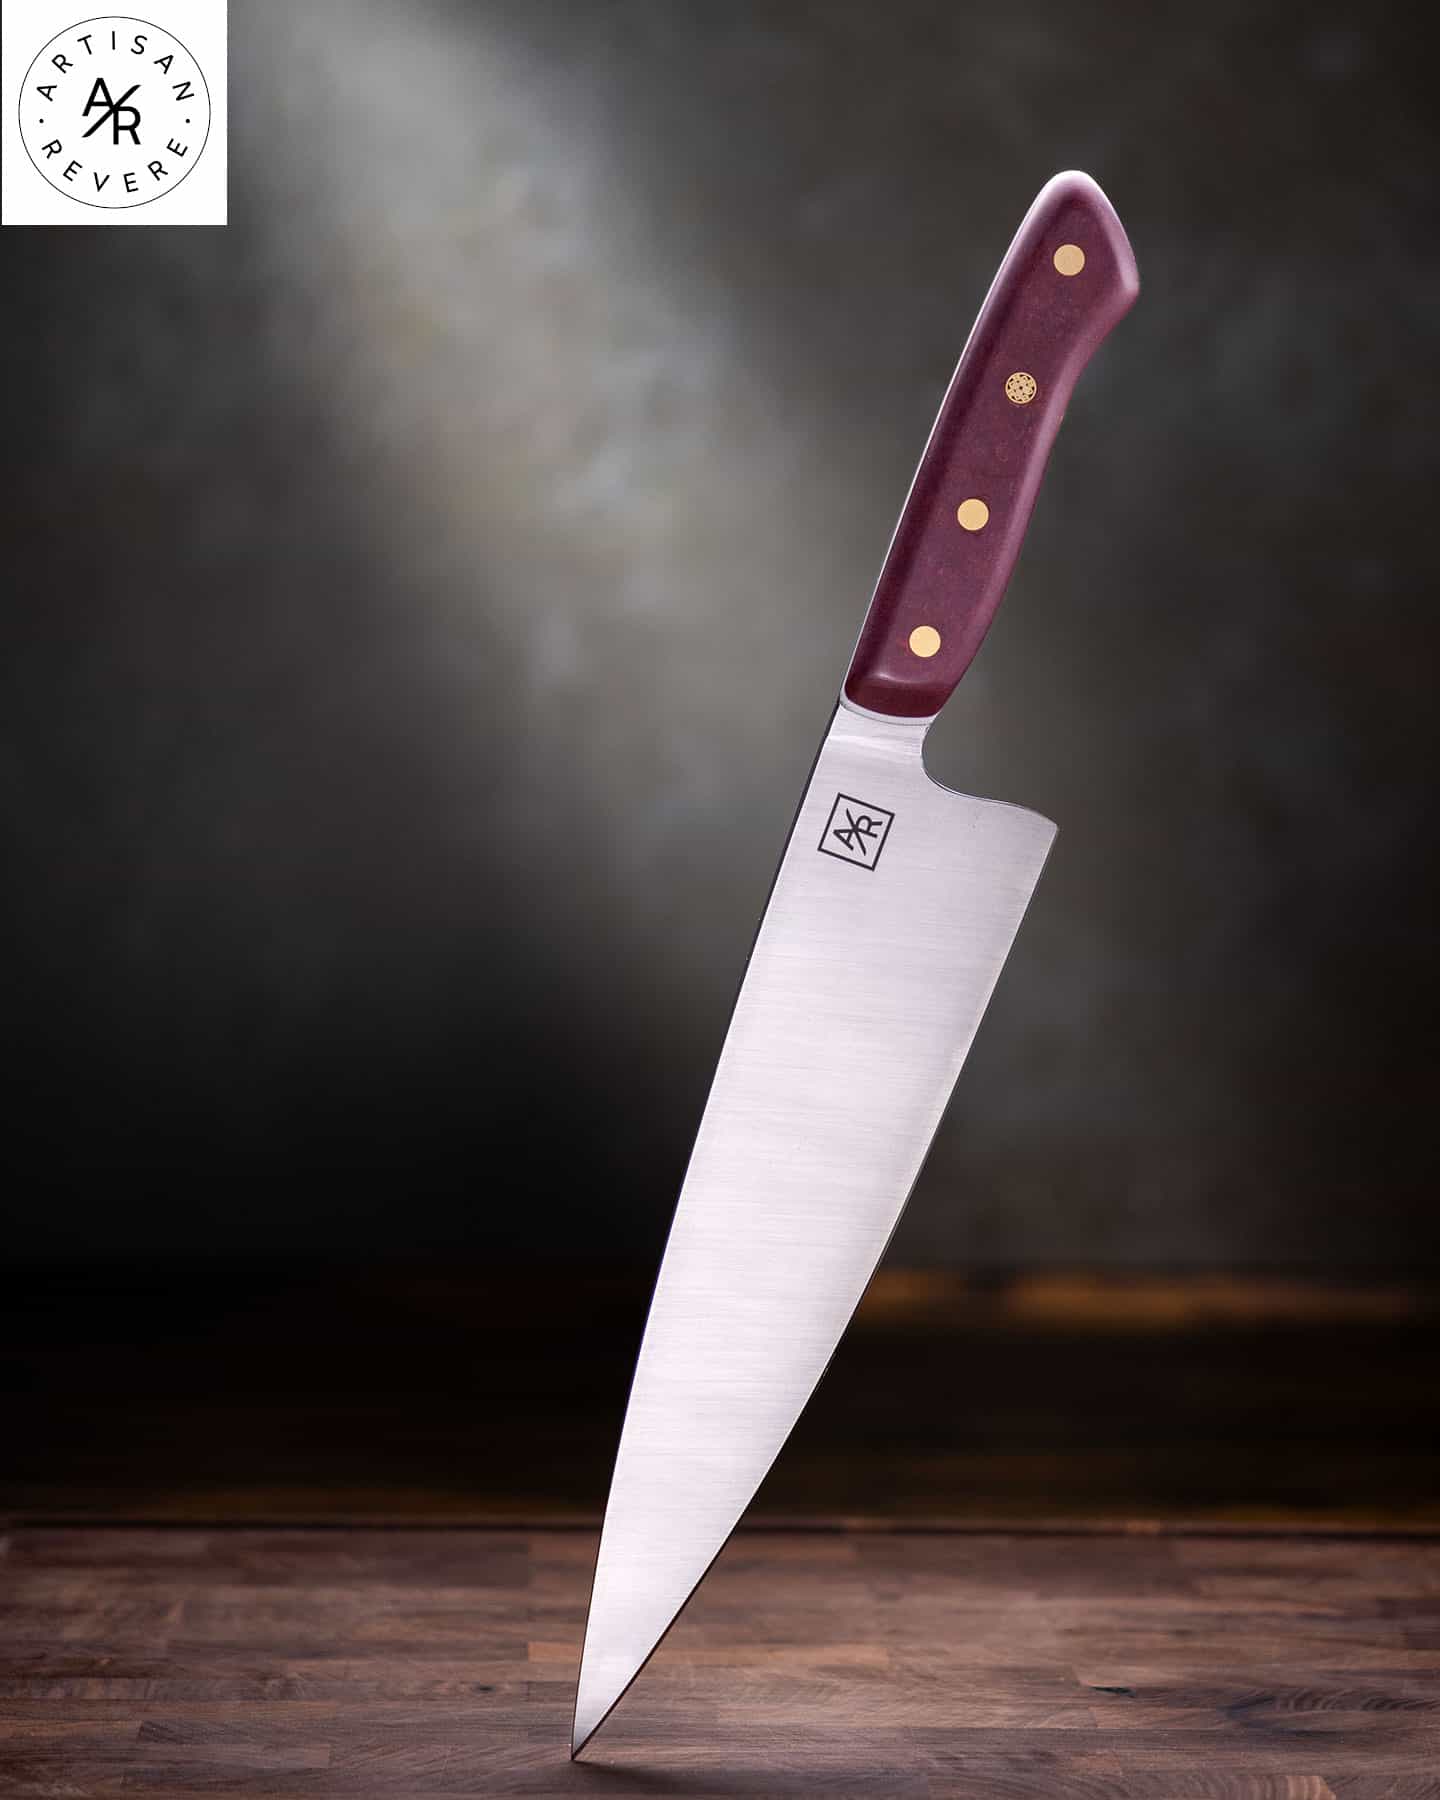 Artisan Revere makes produces some of the best American made kitchen knives we have ever tested. 